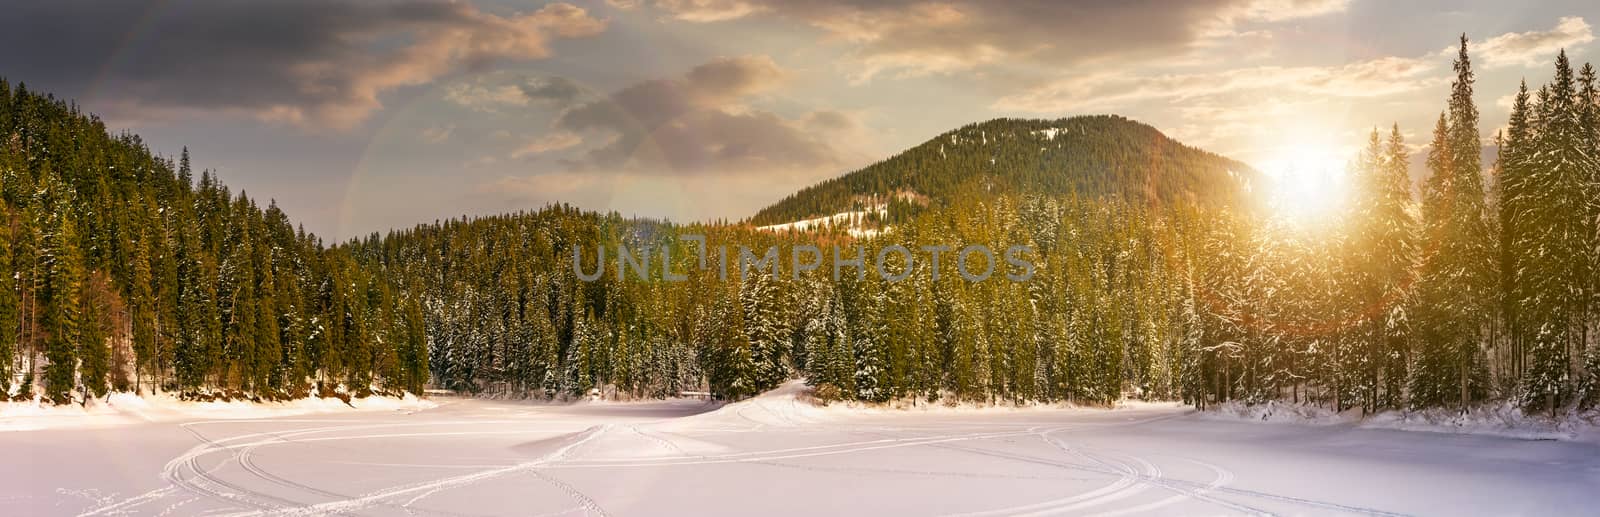 snowy meadow in winter spruce forest at sunset by Pellinni